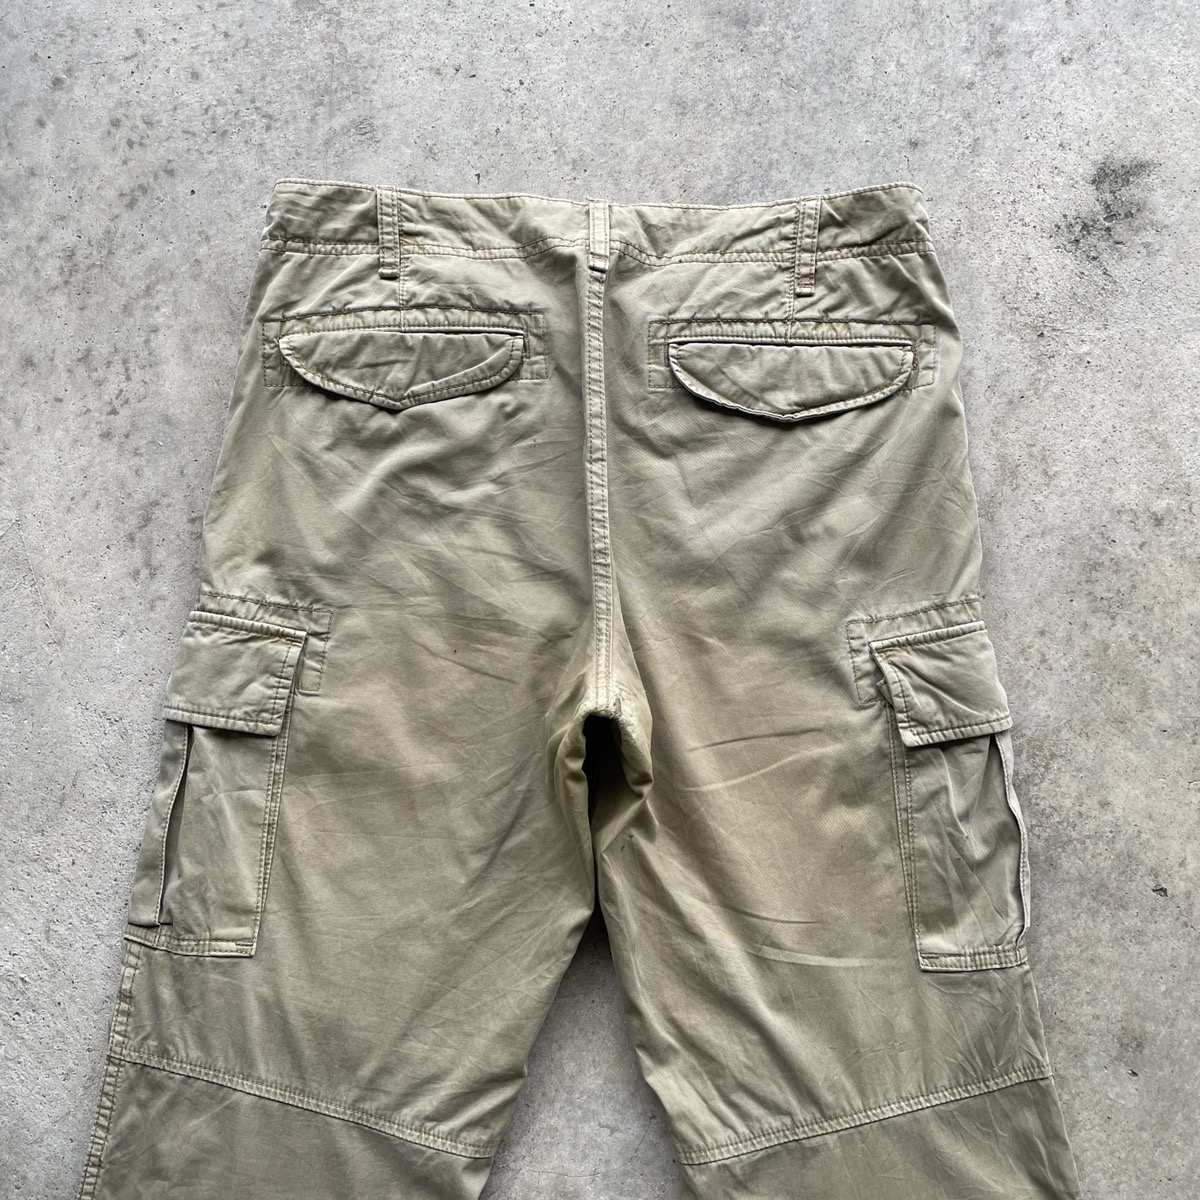 Vintage - Japanese Brand Faded Multipocket Tactical Cargo Pants W33x28 - 12